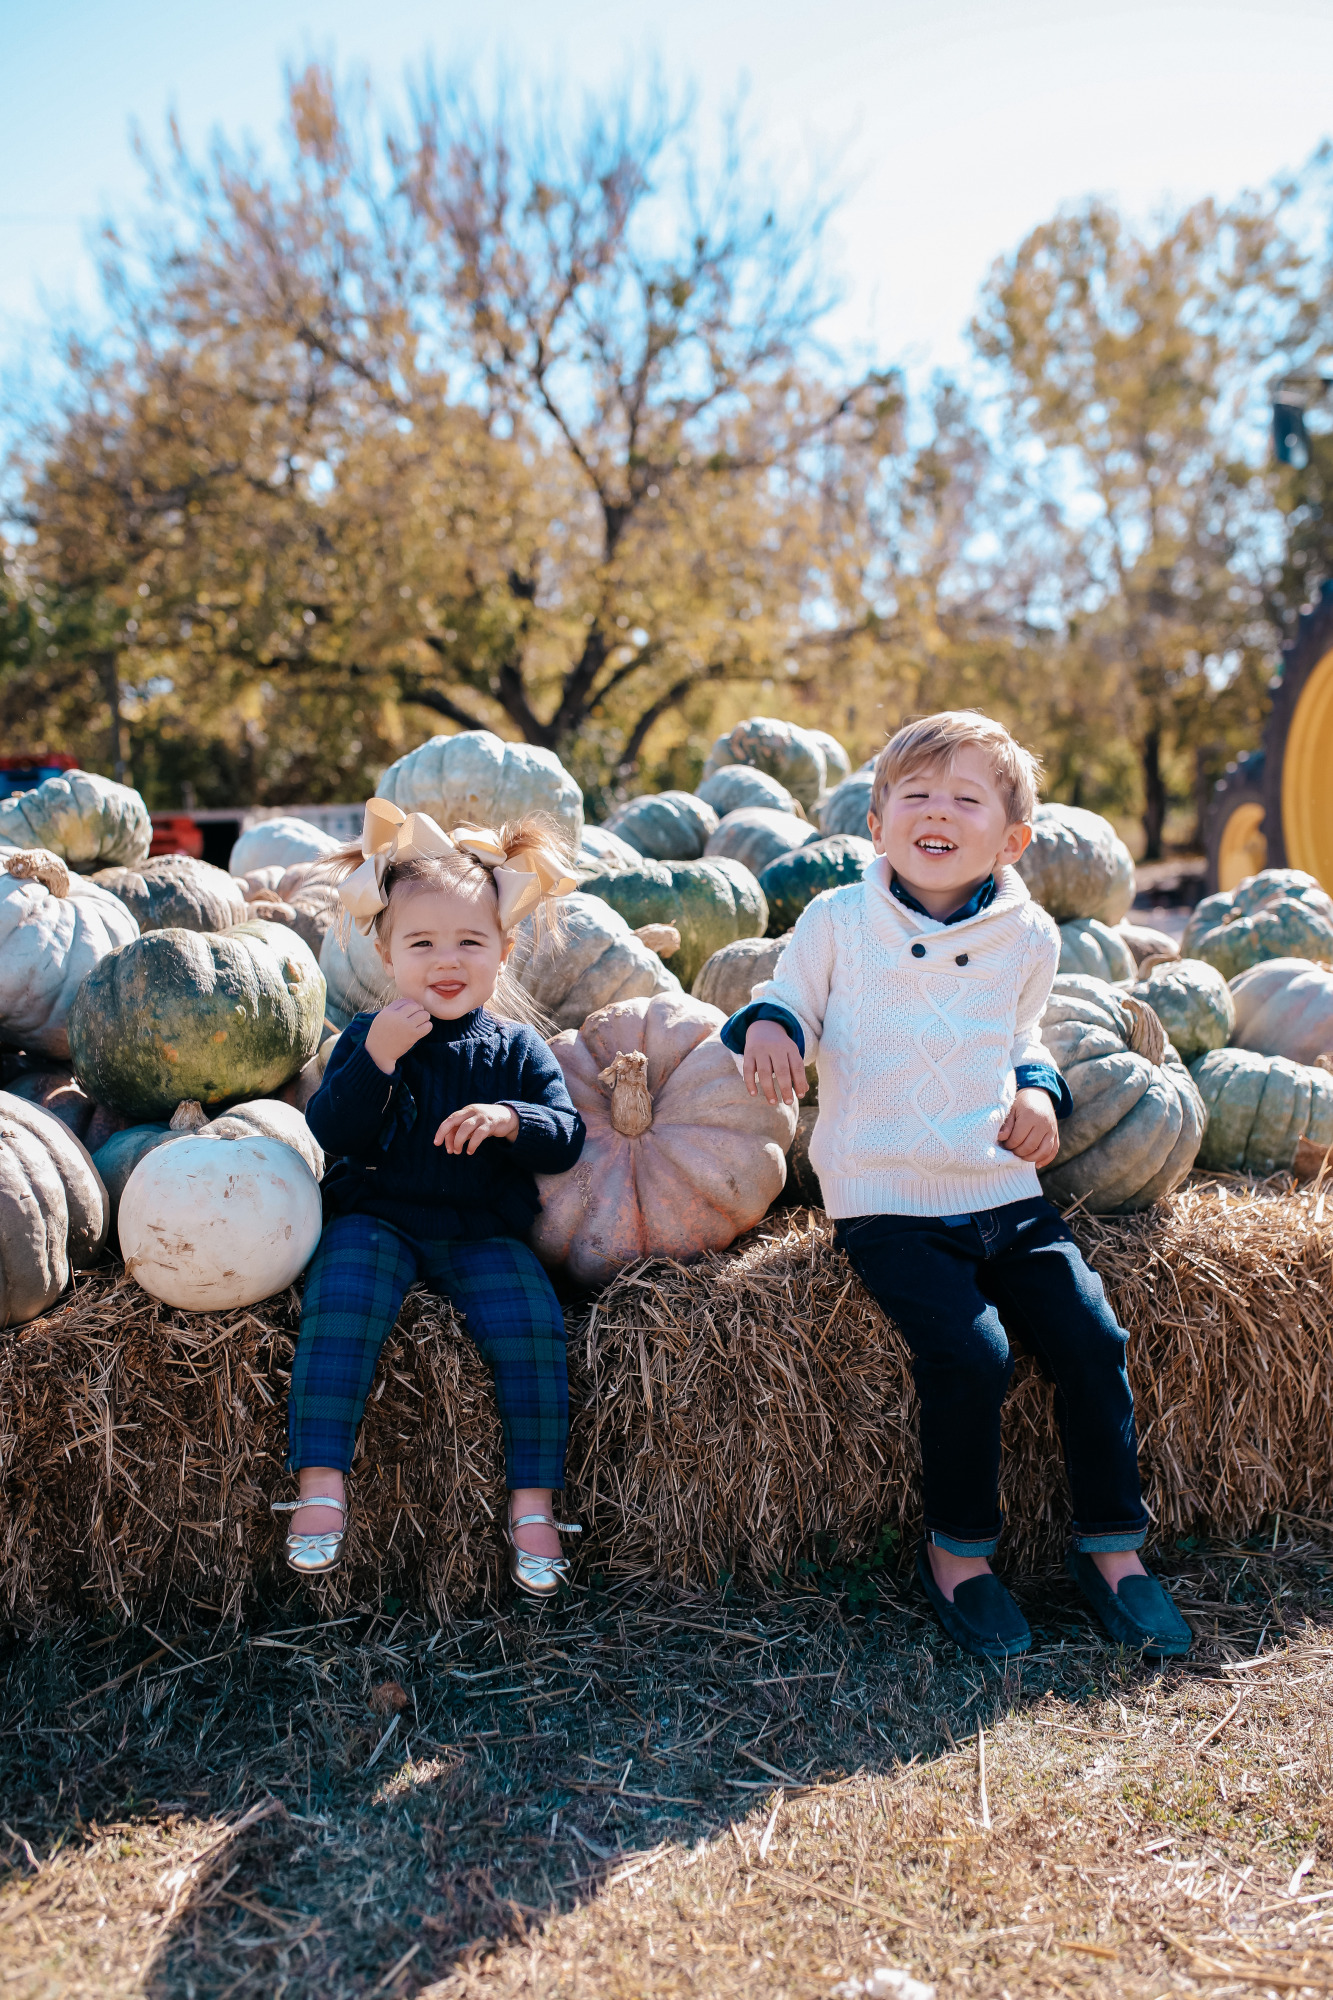 janie and jack kids clothing fall 2020, kids fall fashion 2020, the sweetest thing blog17 | Janie and Jack Kids Clothing by popular US fashion blog, The Sweetest Thing: image of two kids sitting next to a pile of pumpkins and wearing a Janie and Jack PLAID POPLIN SHIRT, Janie and Jack SHAWL COLLAR PULLOVER, Janie and Jack SLIM SELVEDGE JEAN IN MOONLIGHT INDIGO WASH, Janie and Jack LEATHER TRIM BELT, Janie and Jack ARGYLE SOCK, Janie and Jack SUEDE DRIVING SHOE, Janie and Jack PEPLUM BOW SWEATER, Janie and Jack PLAID PONTE BUTTON CUFF PANT, and Janie and Jack METALLIC BOW FLAT.